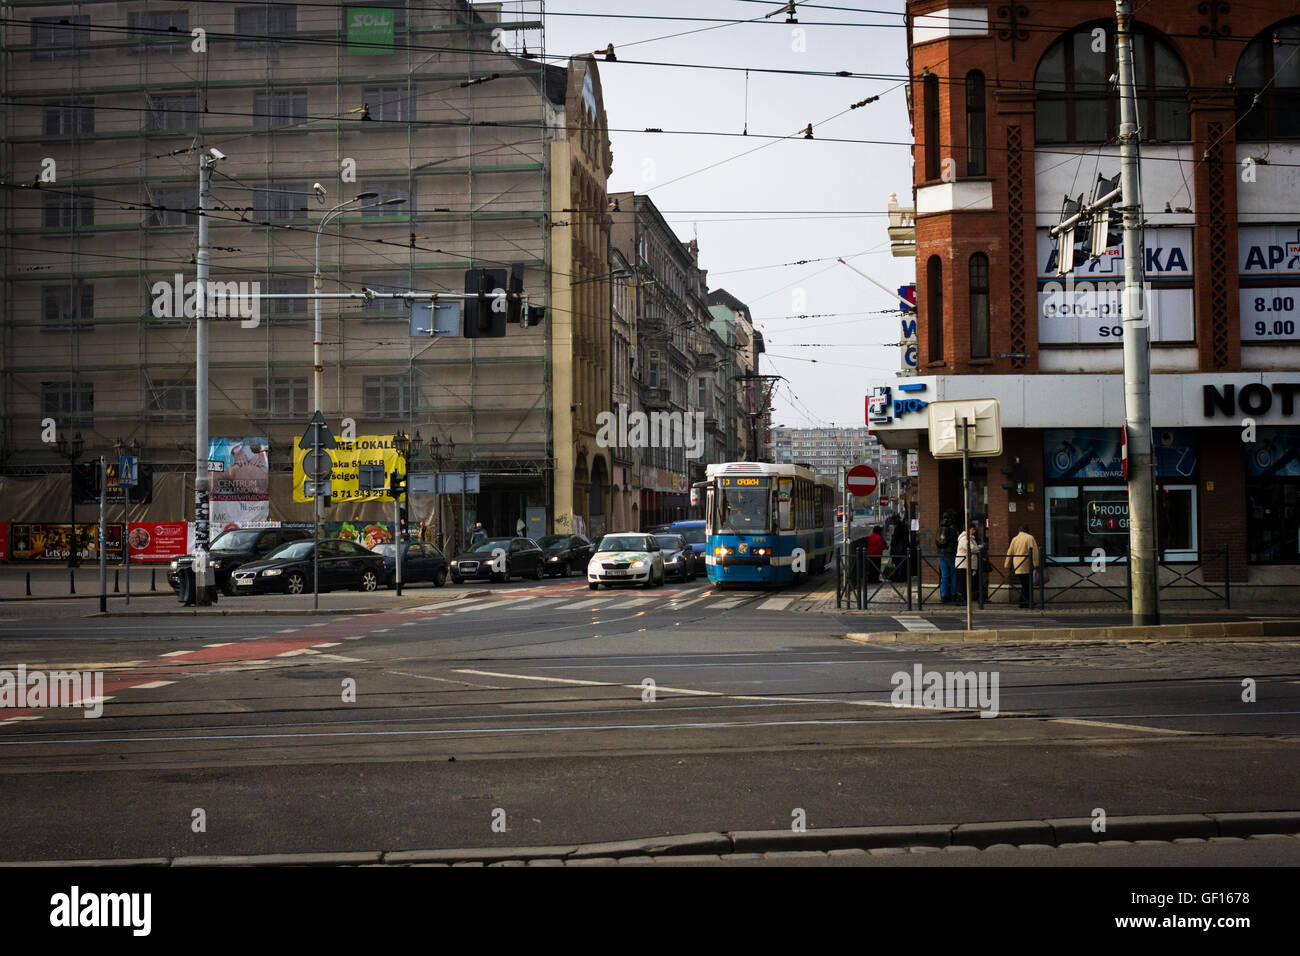 Traffic waiting at a busy intersection in Wroclaw, Poland Stock Photo